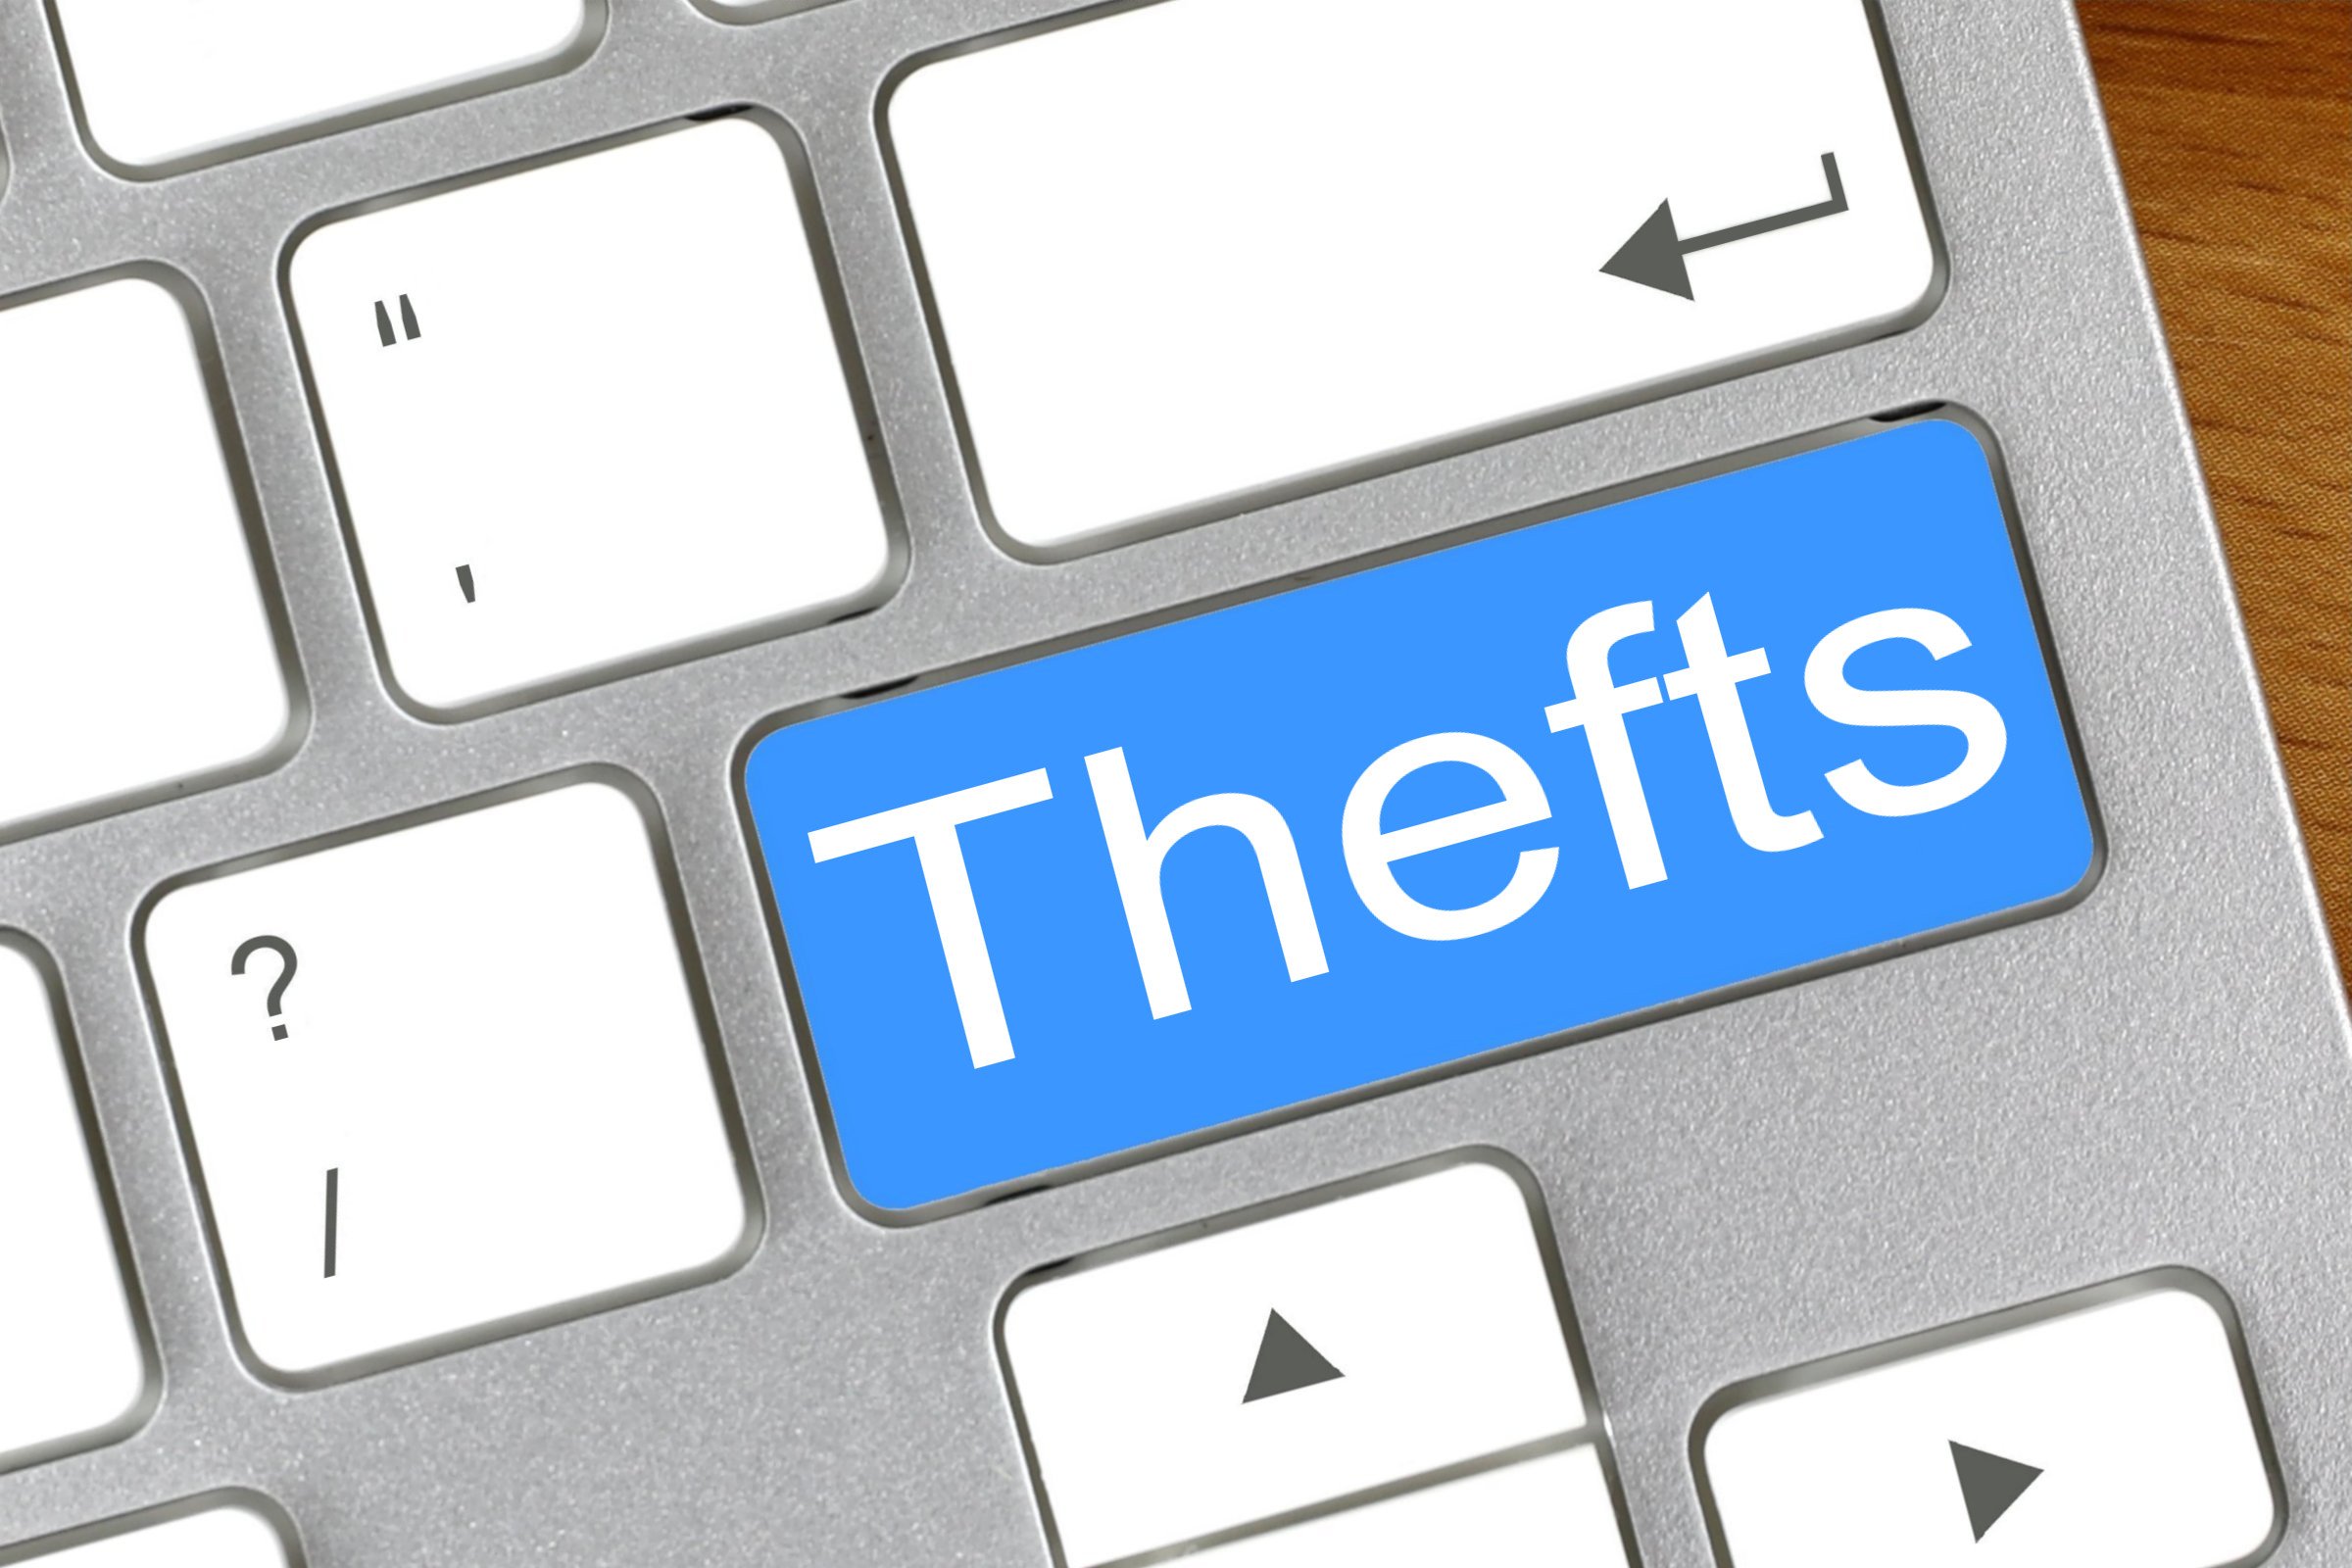 thefts